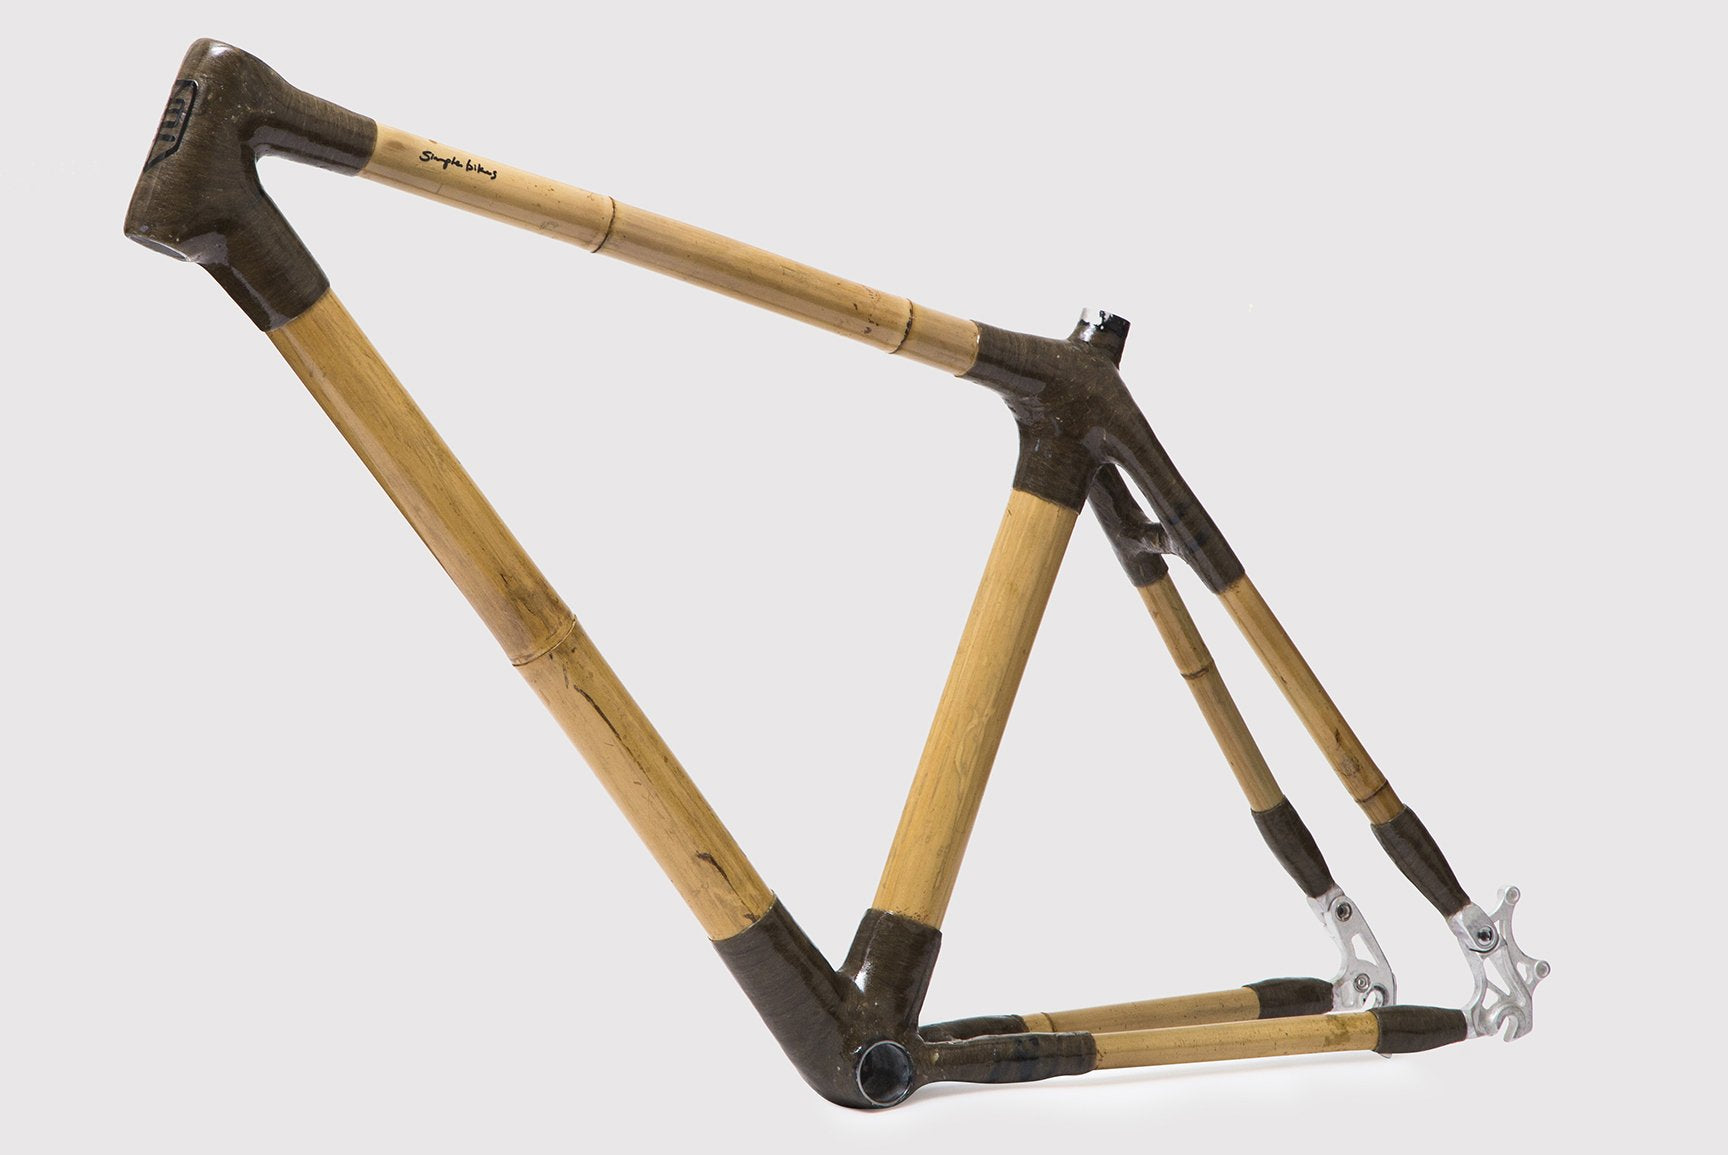 Bamboo, Flax, Magnesium, Steel. An Introduction into Alternative Bicycle Materials